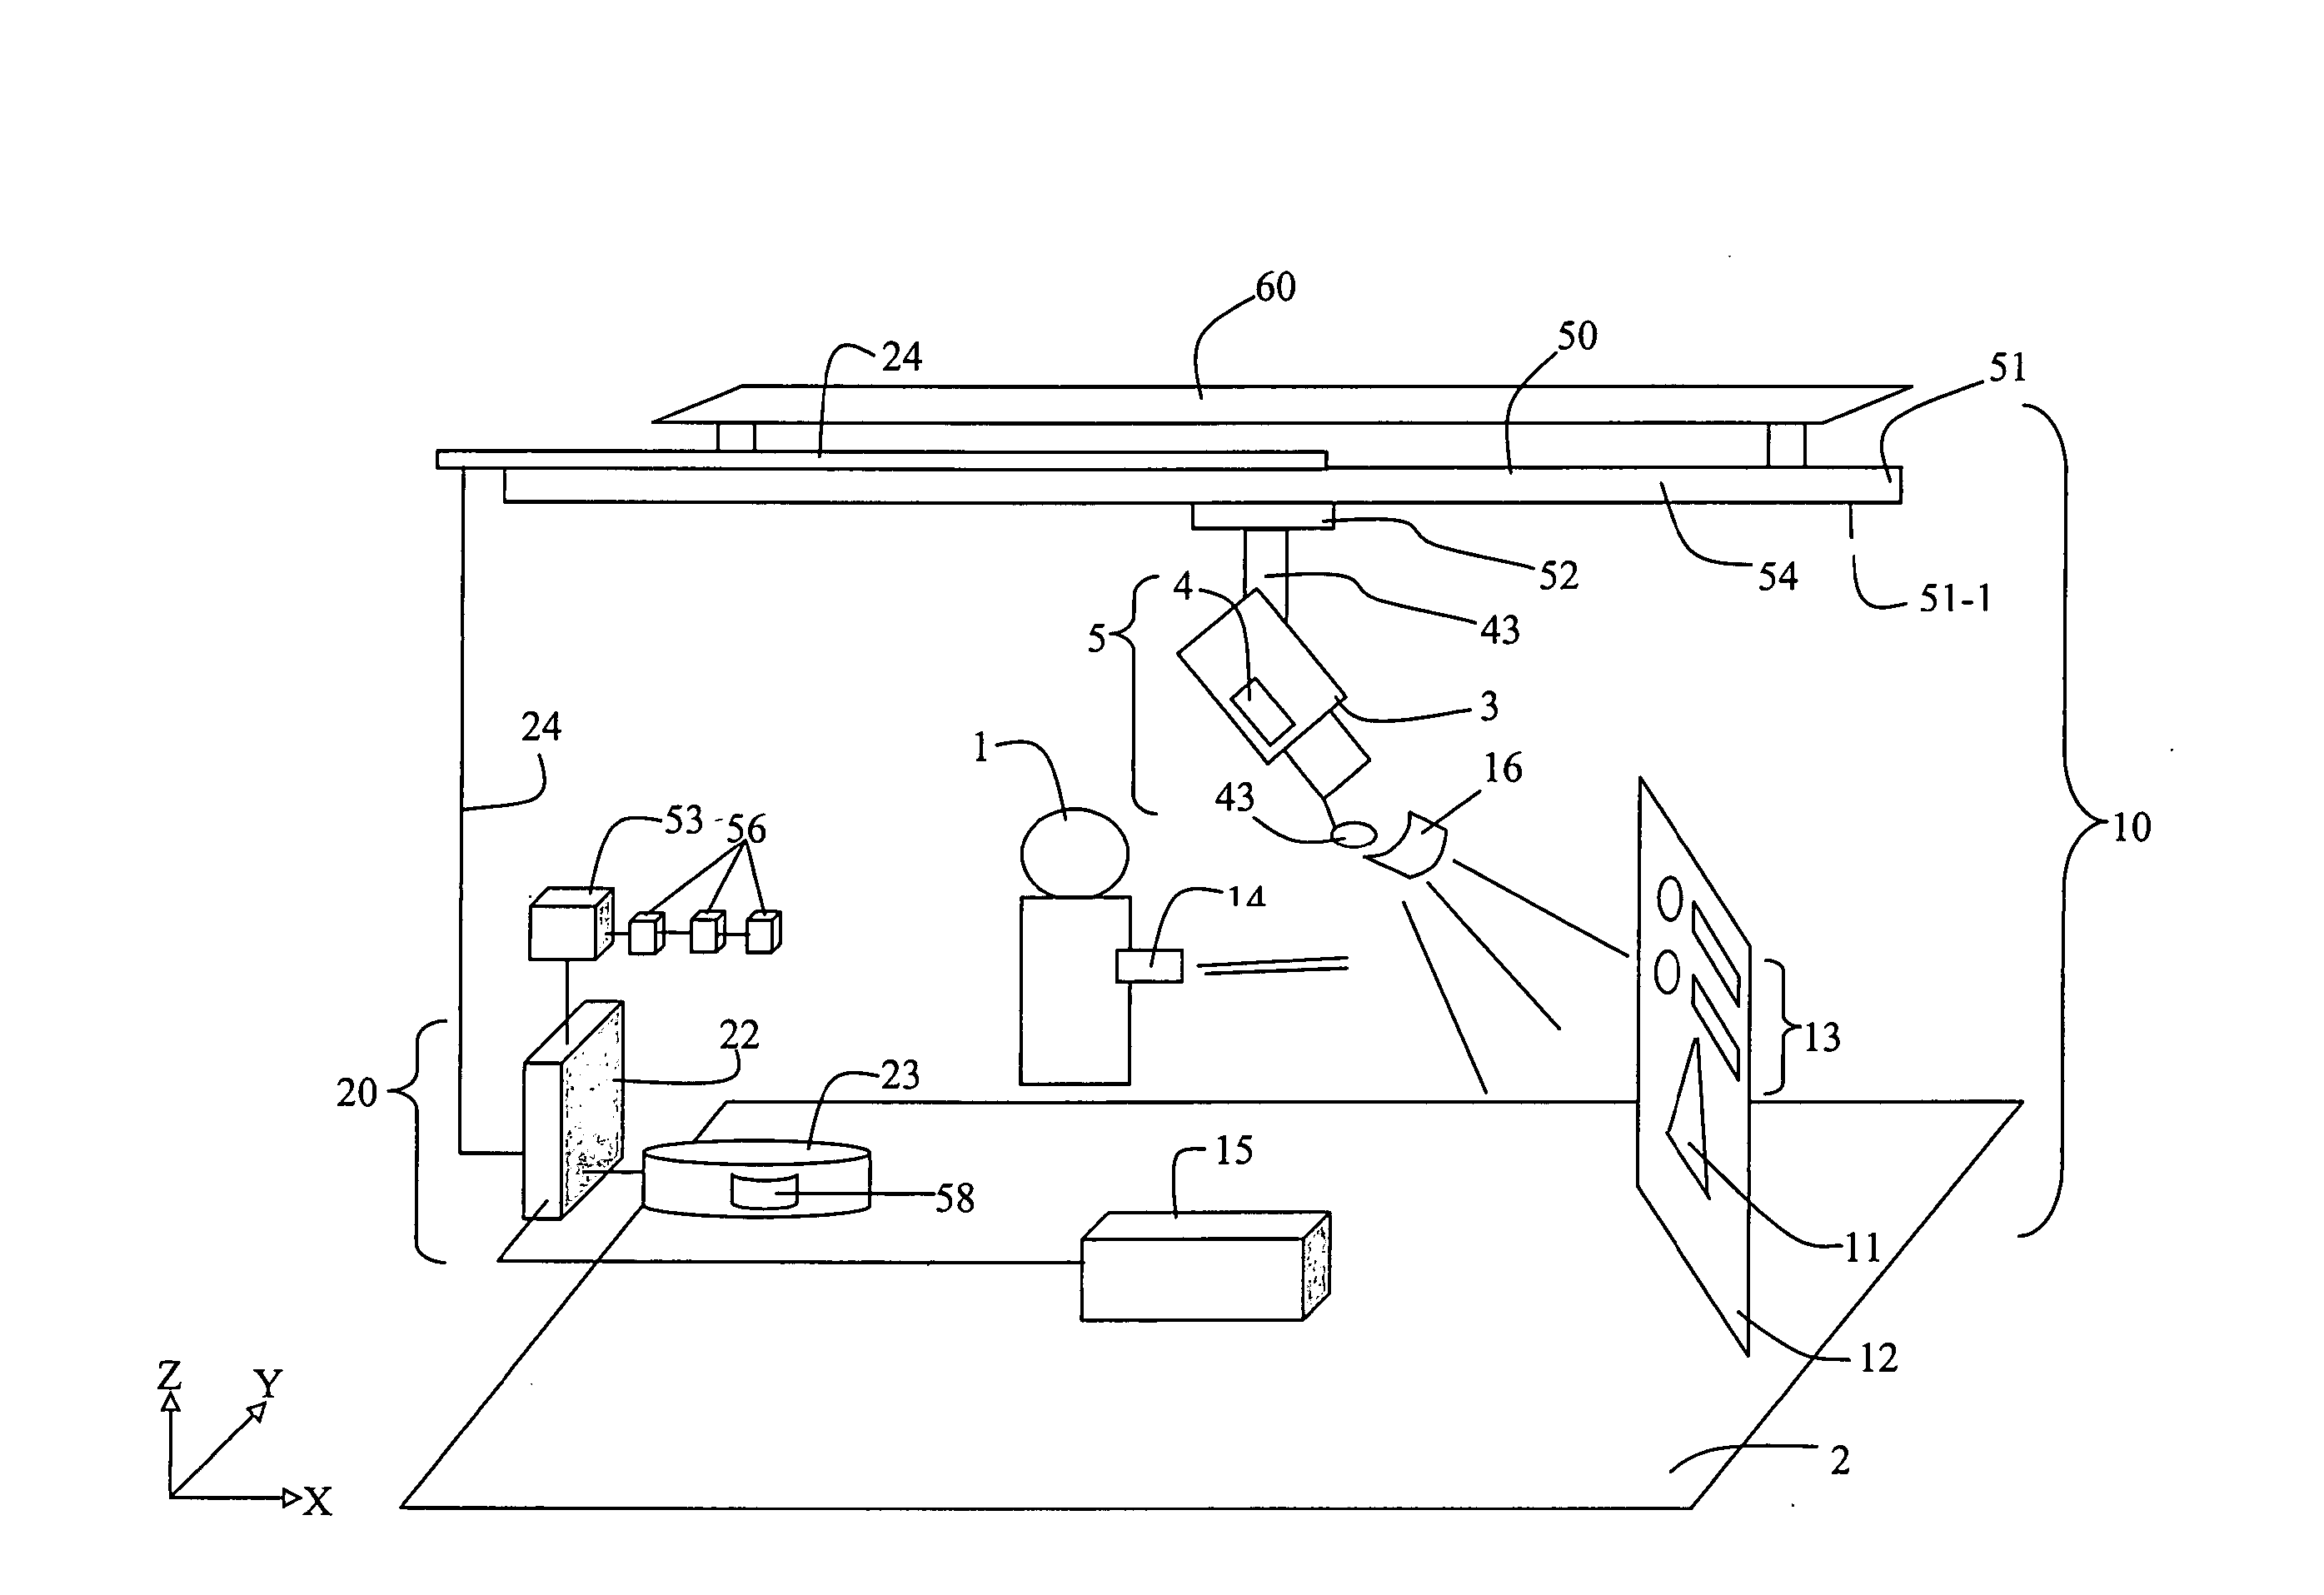 System and method for positioning projectors in space to steer projections and afford interaction